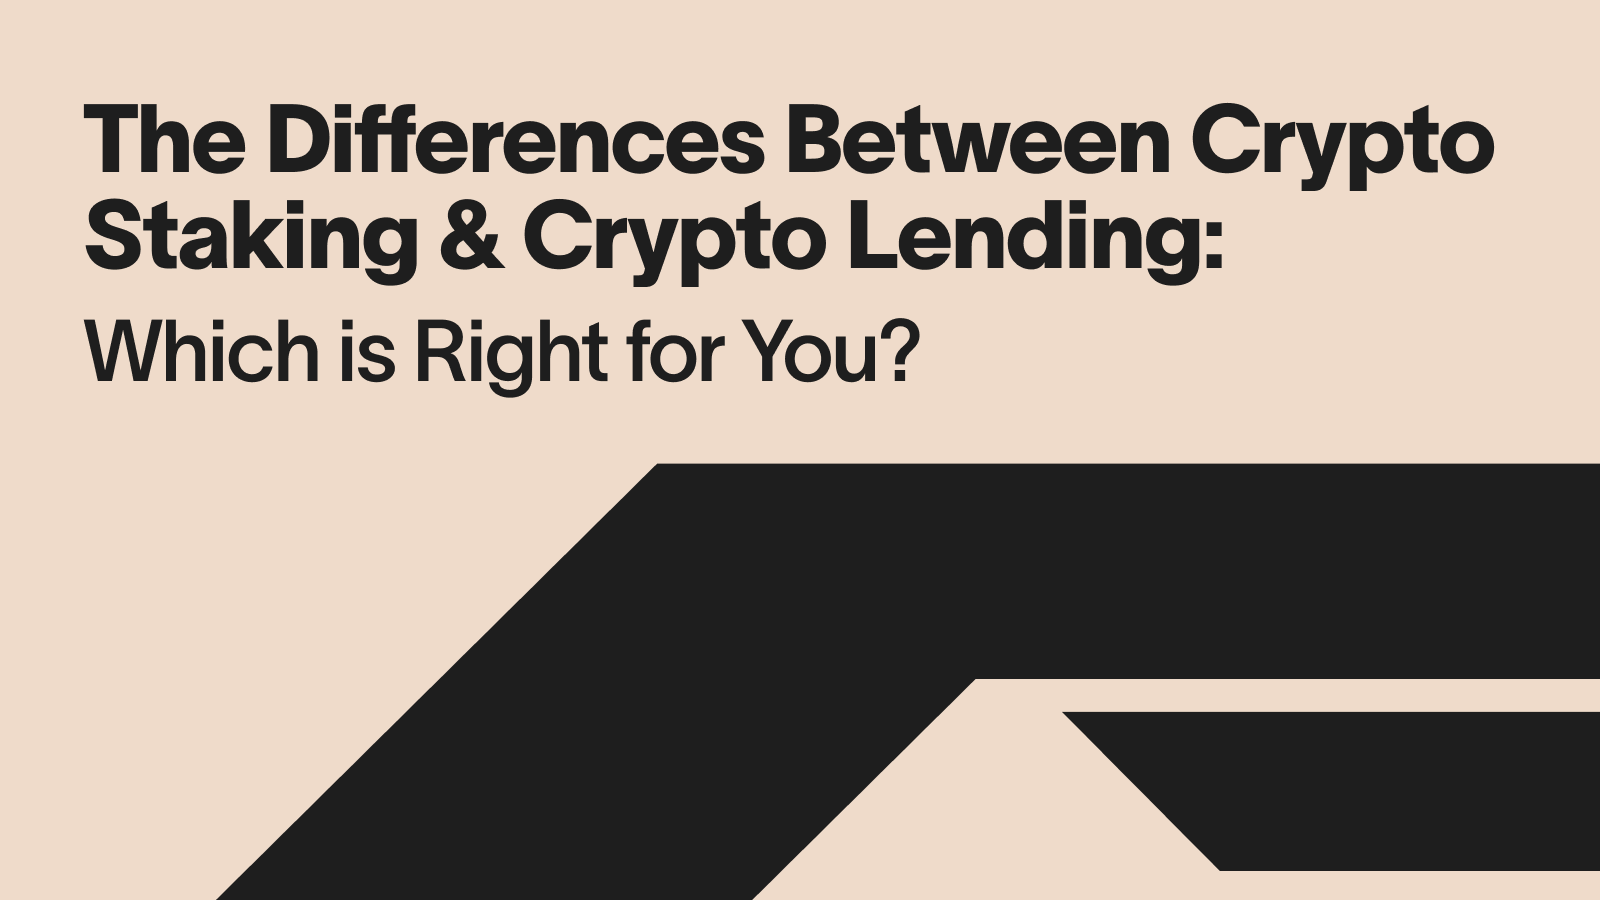 The Differences Between Crypto Staking & Crypto Lending_ (1)